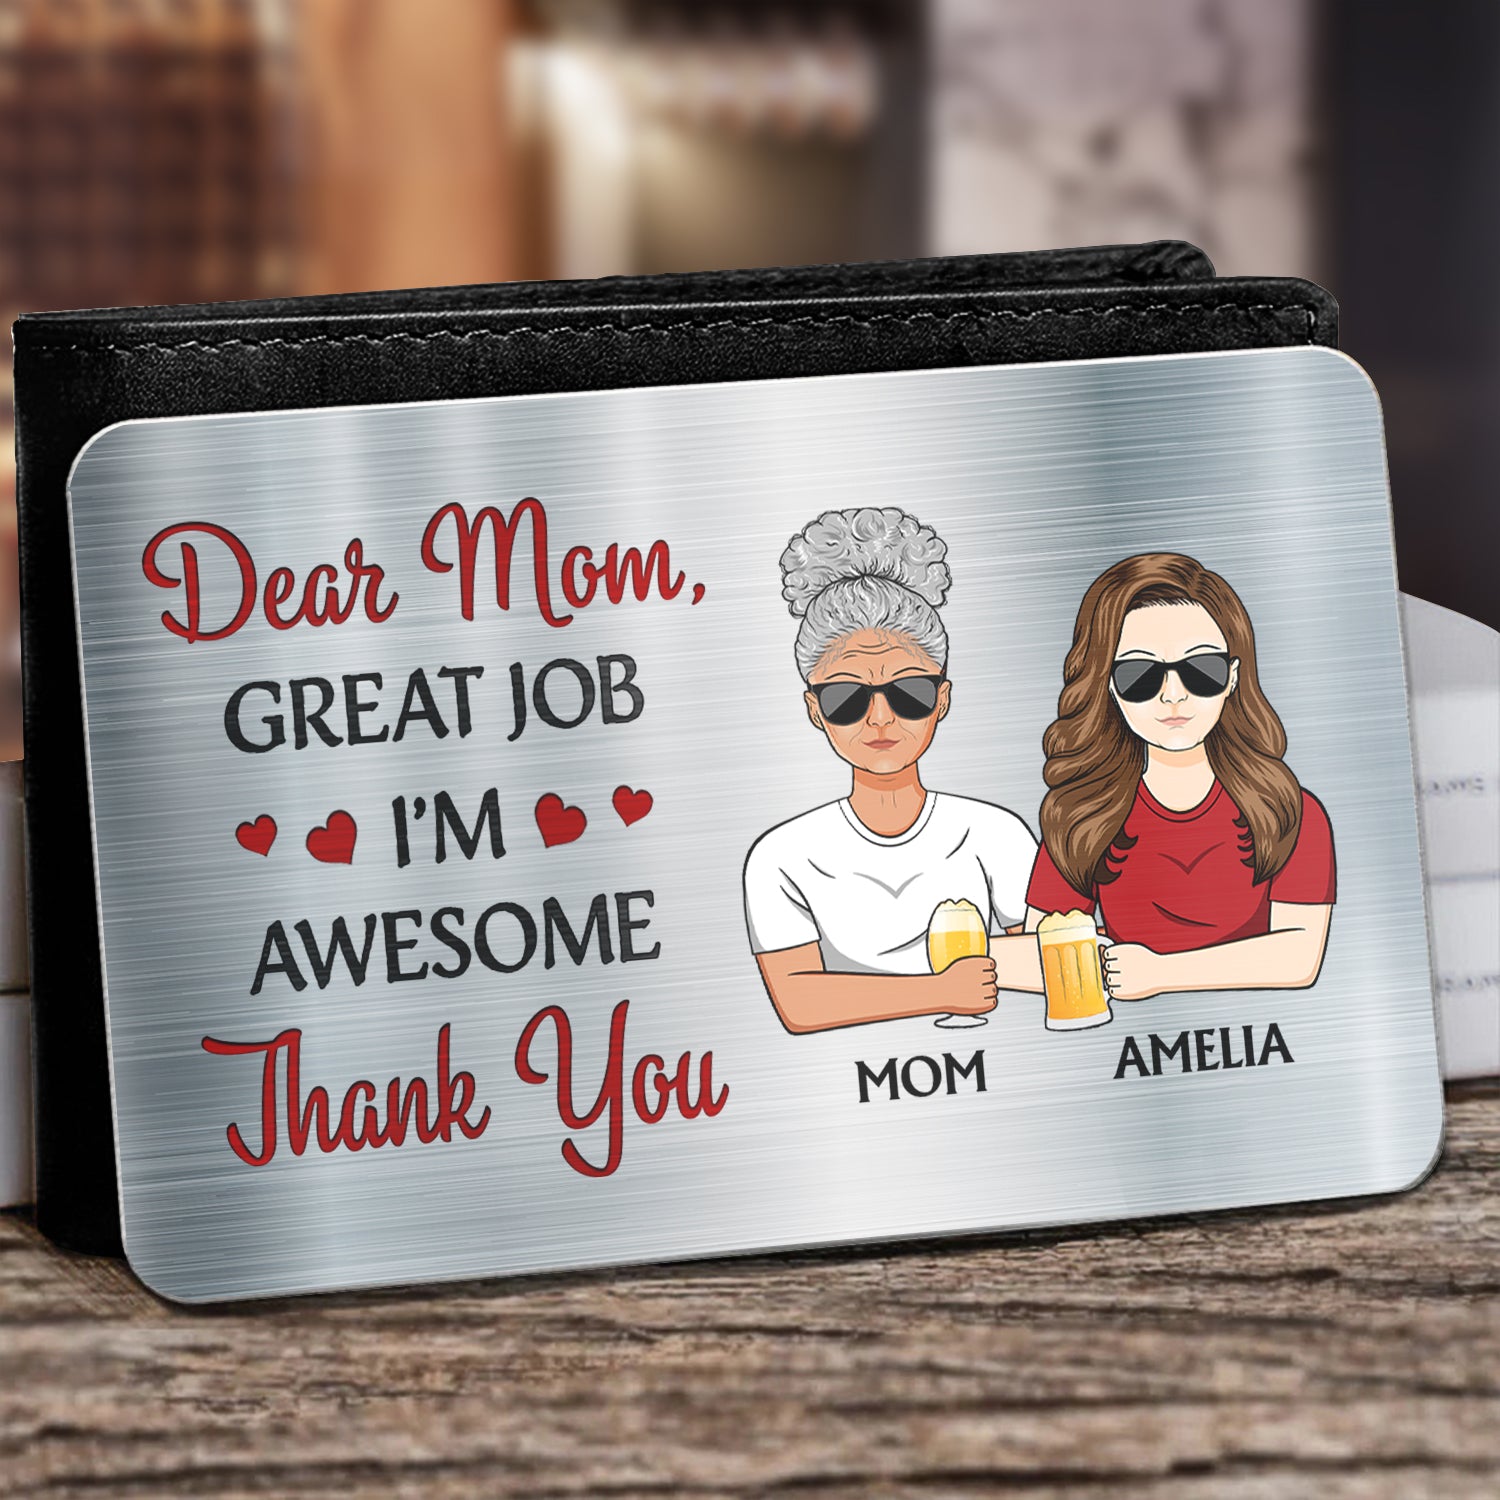 Great Job We're Awesome - Gift For Mom, Mother, Grandma - Personalized Aluminum Wallet Card